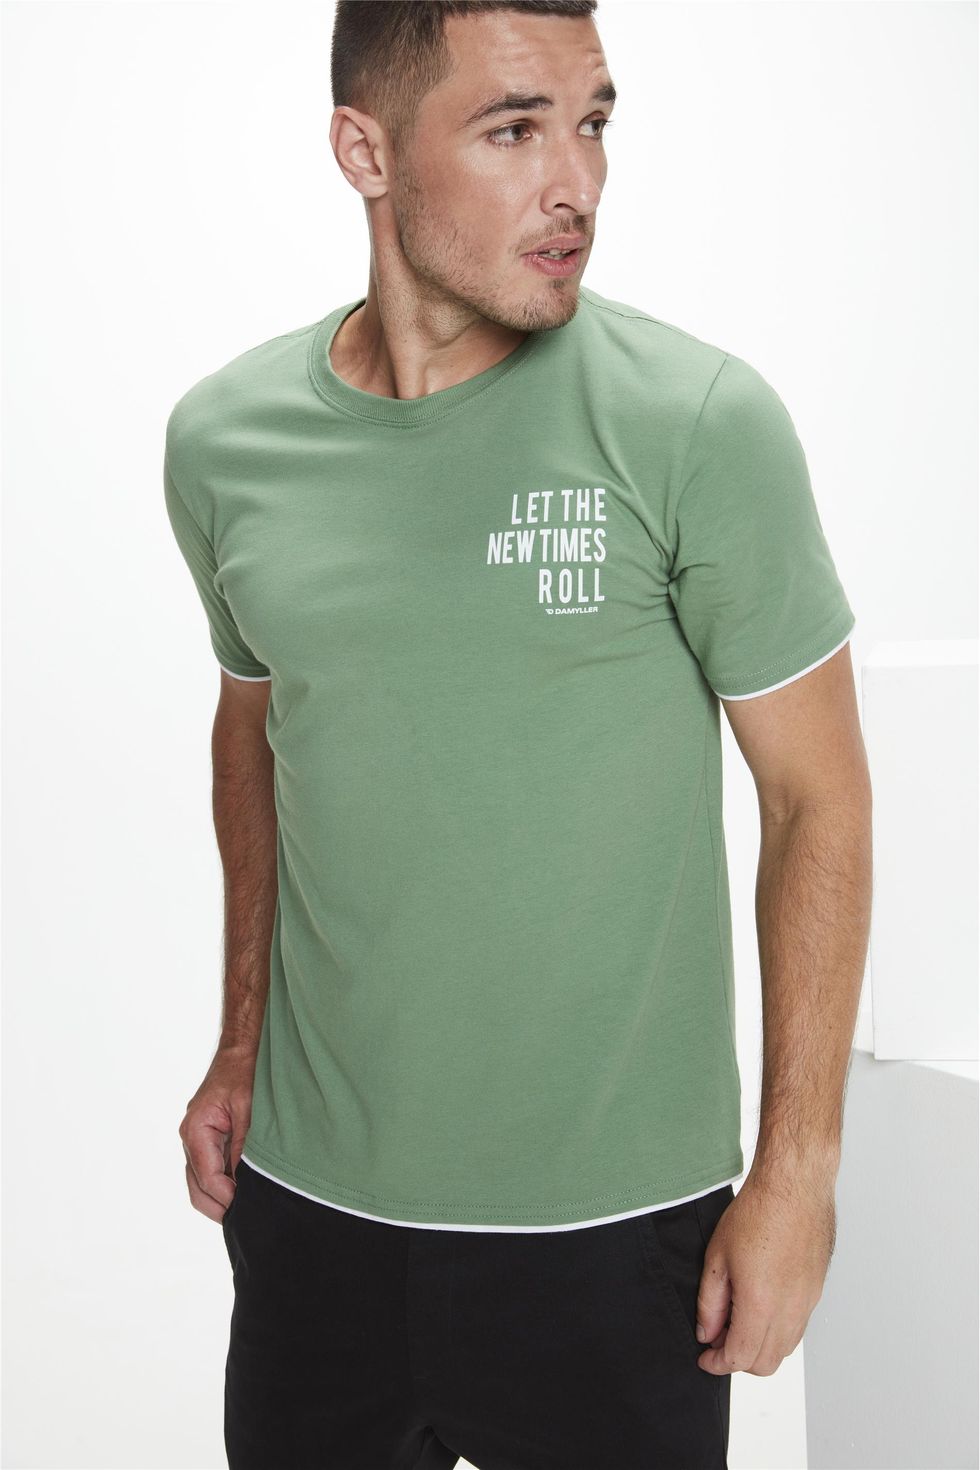 Camiseta-Estampa-Let-The-New-Times-Roll-Frente--